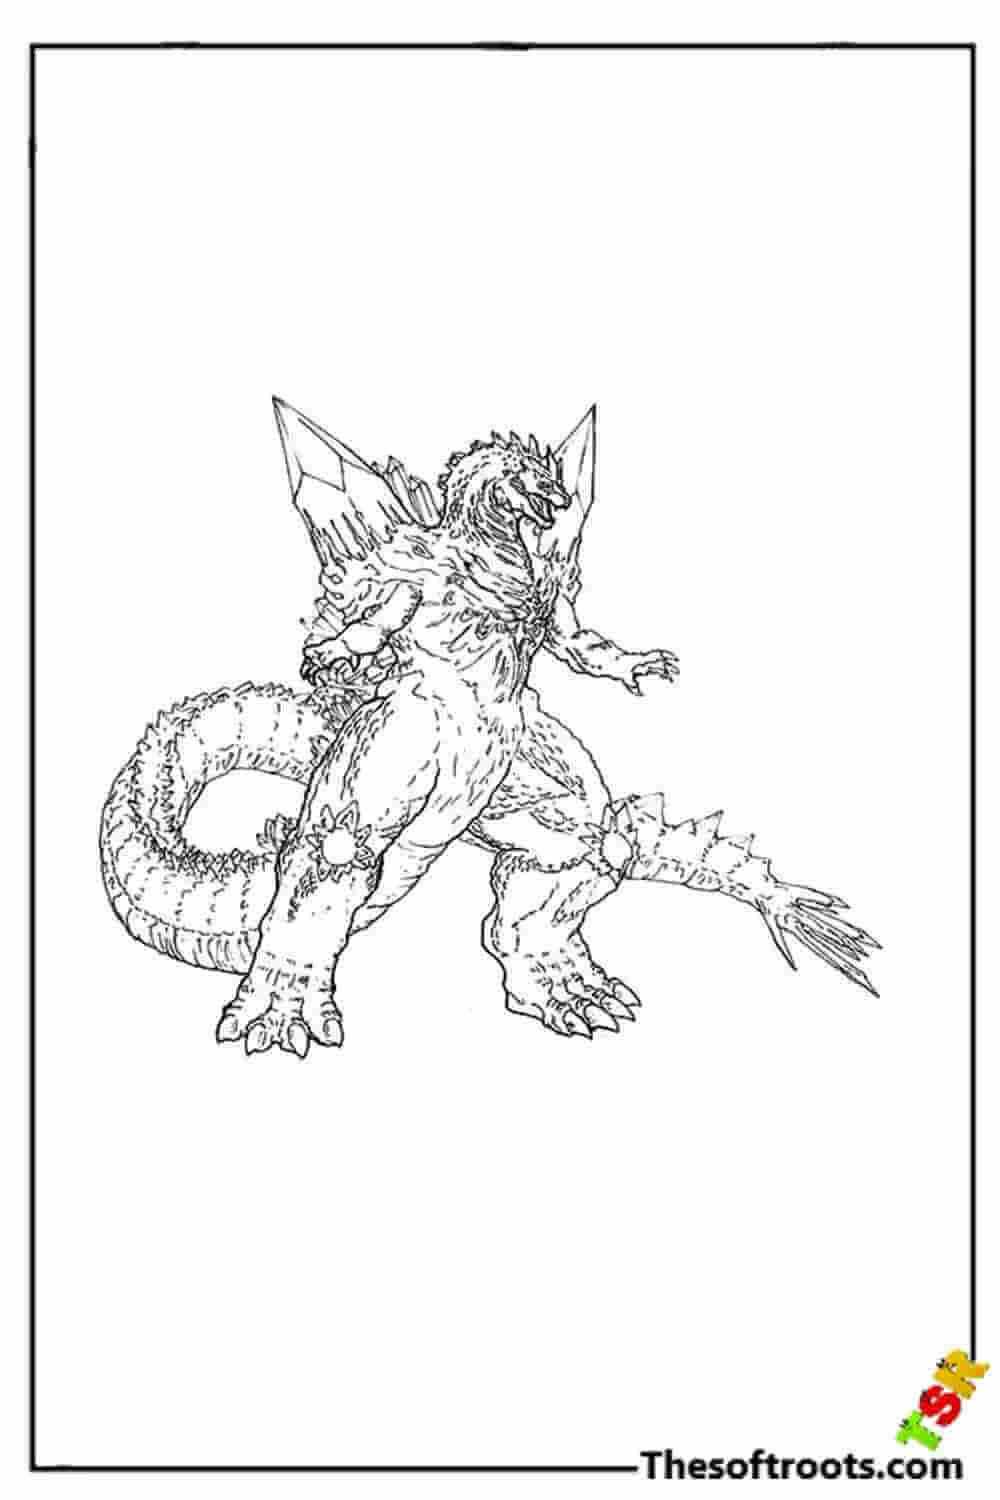 Space Godzilla coloring pages